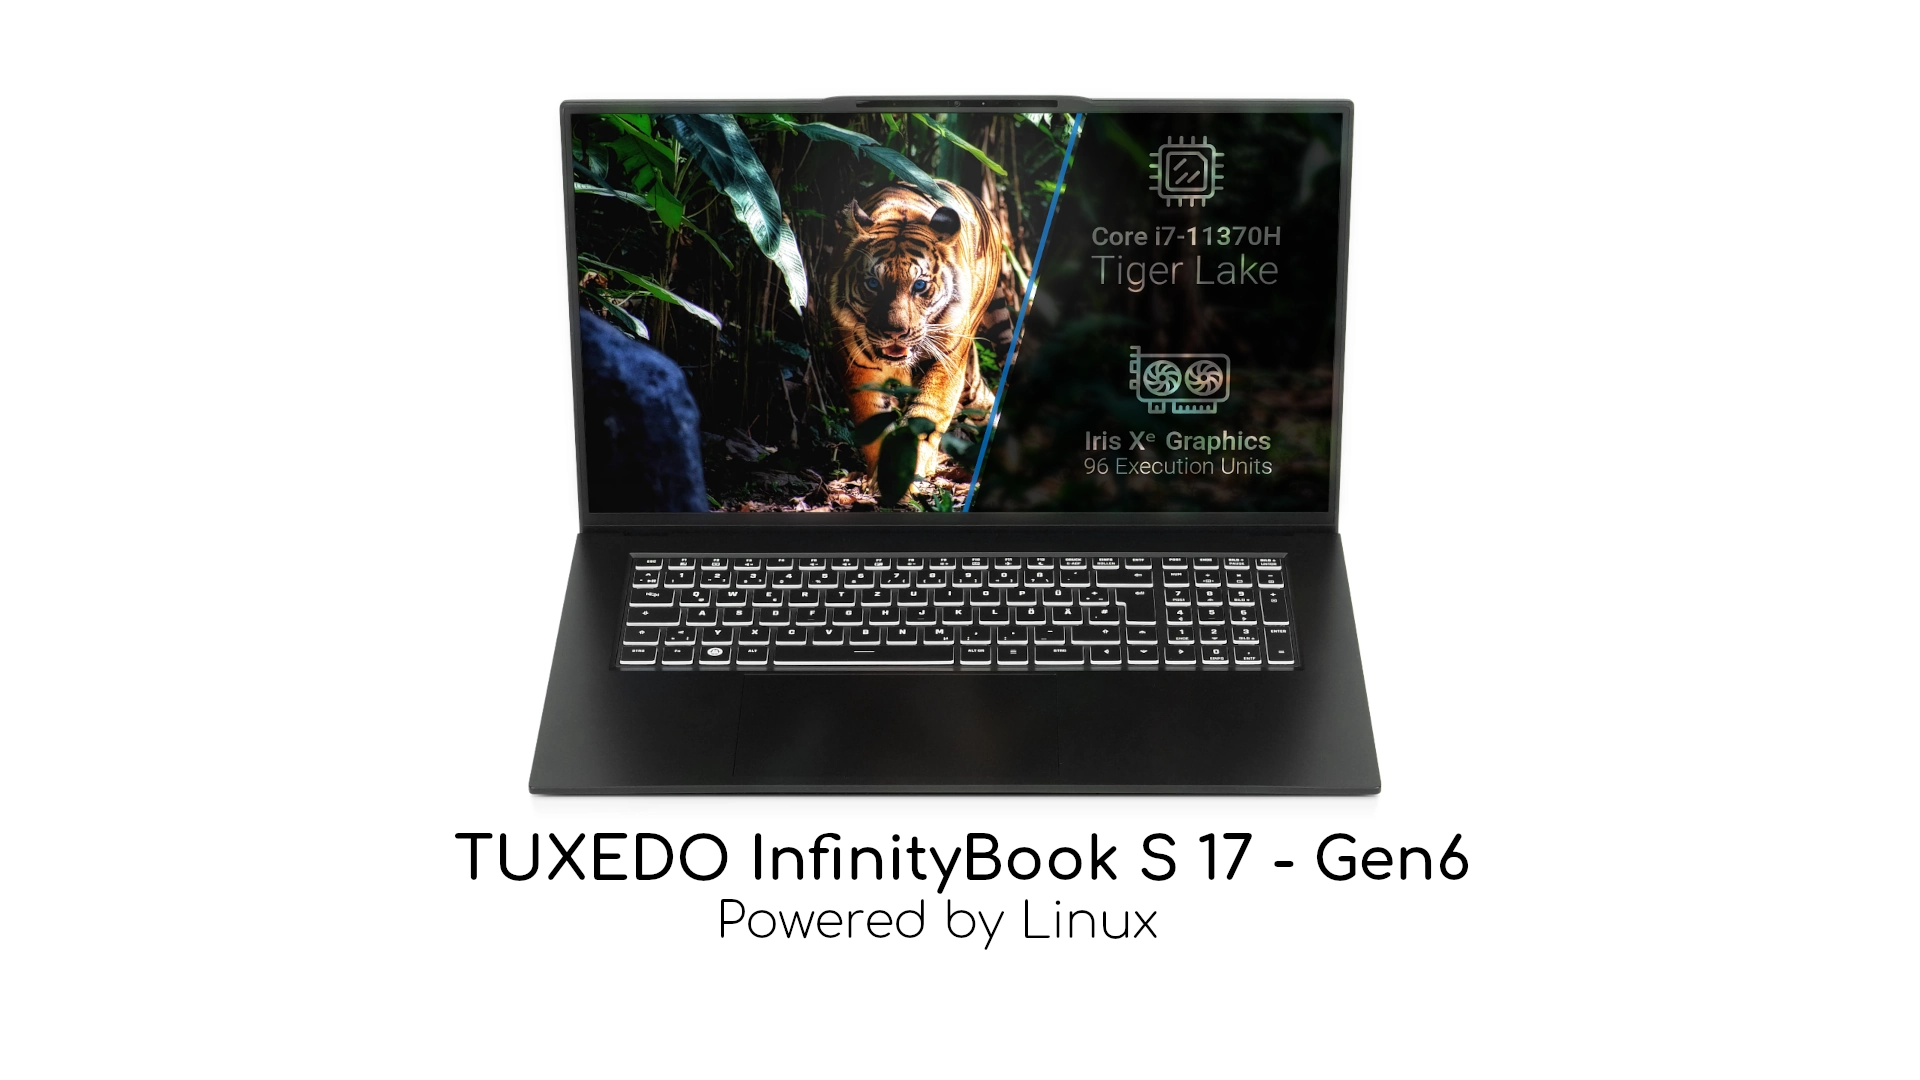 TUXEDO InfinityBook S 17 Linux Laptop Unveiled with 11th Gen Tiger Lake CPUs, Compact Design